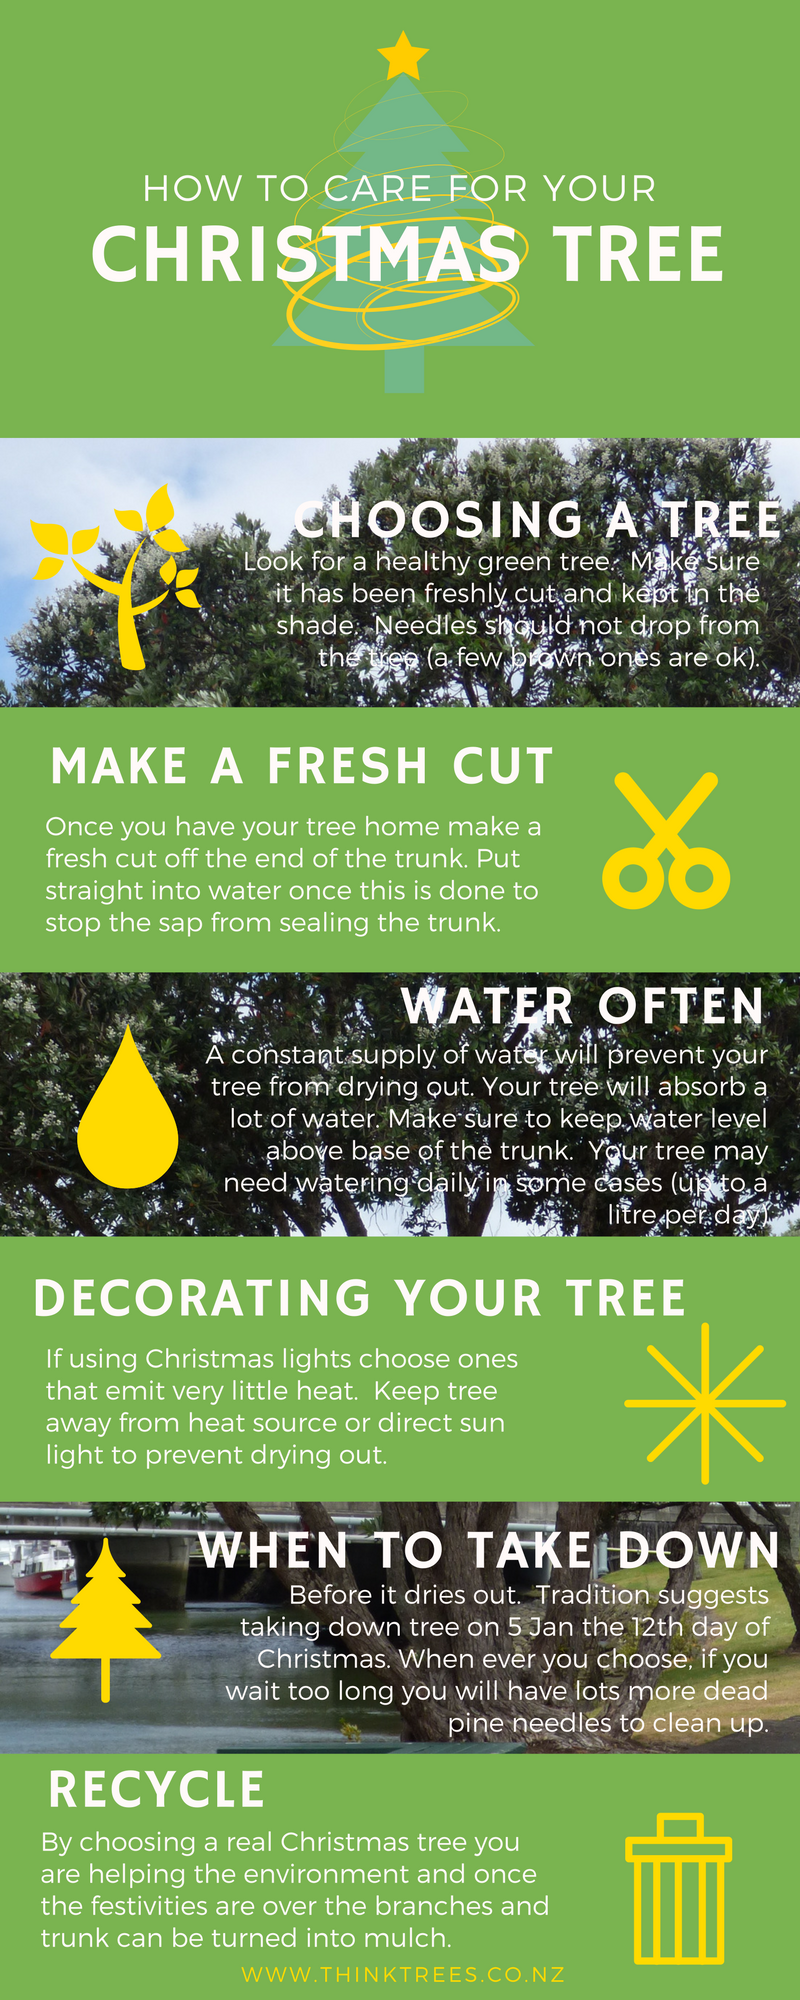 how-to-care-for-your-christmas-tree